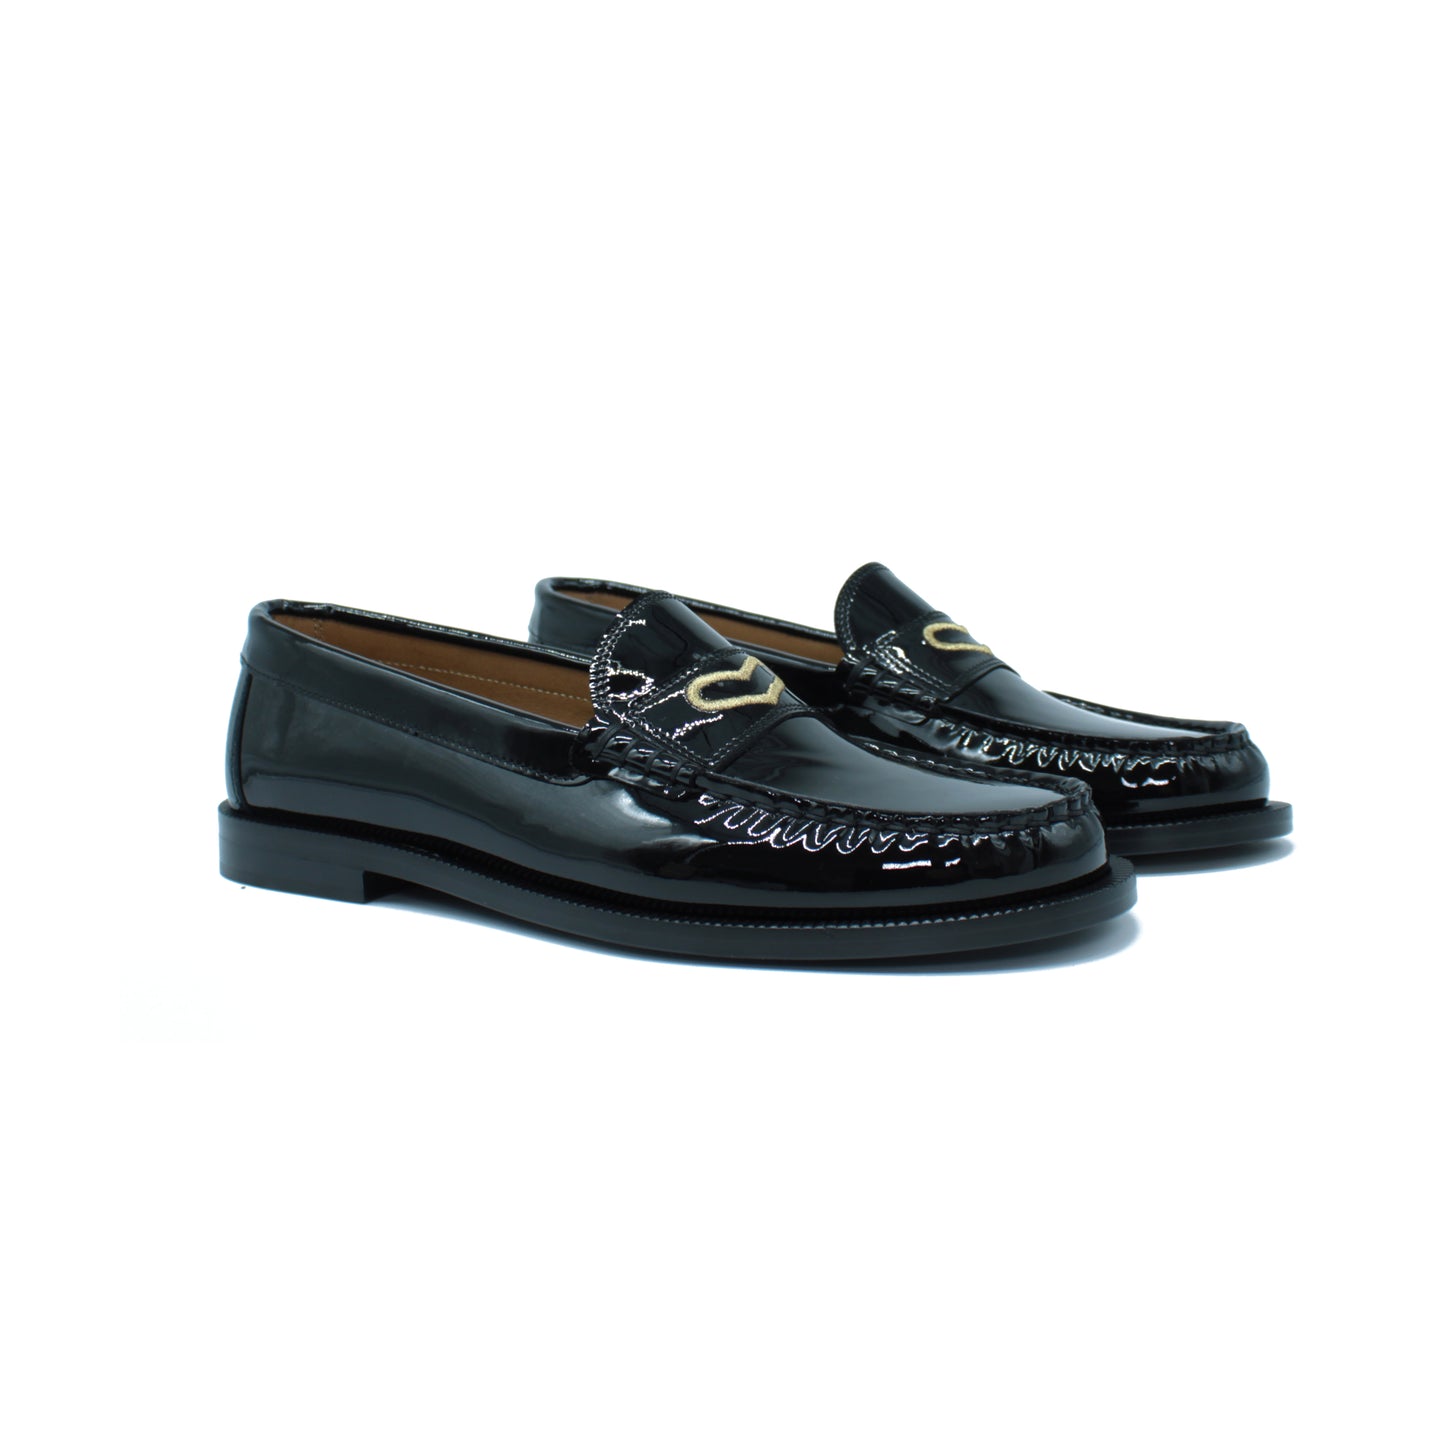 Moccasin in black patent leather